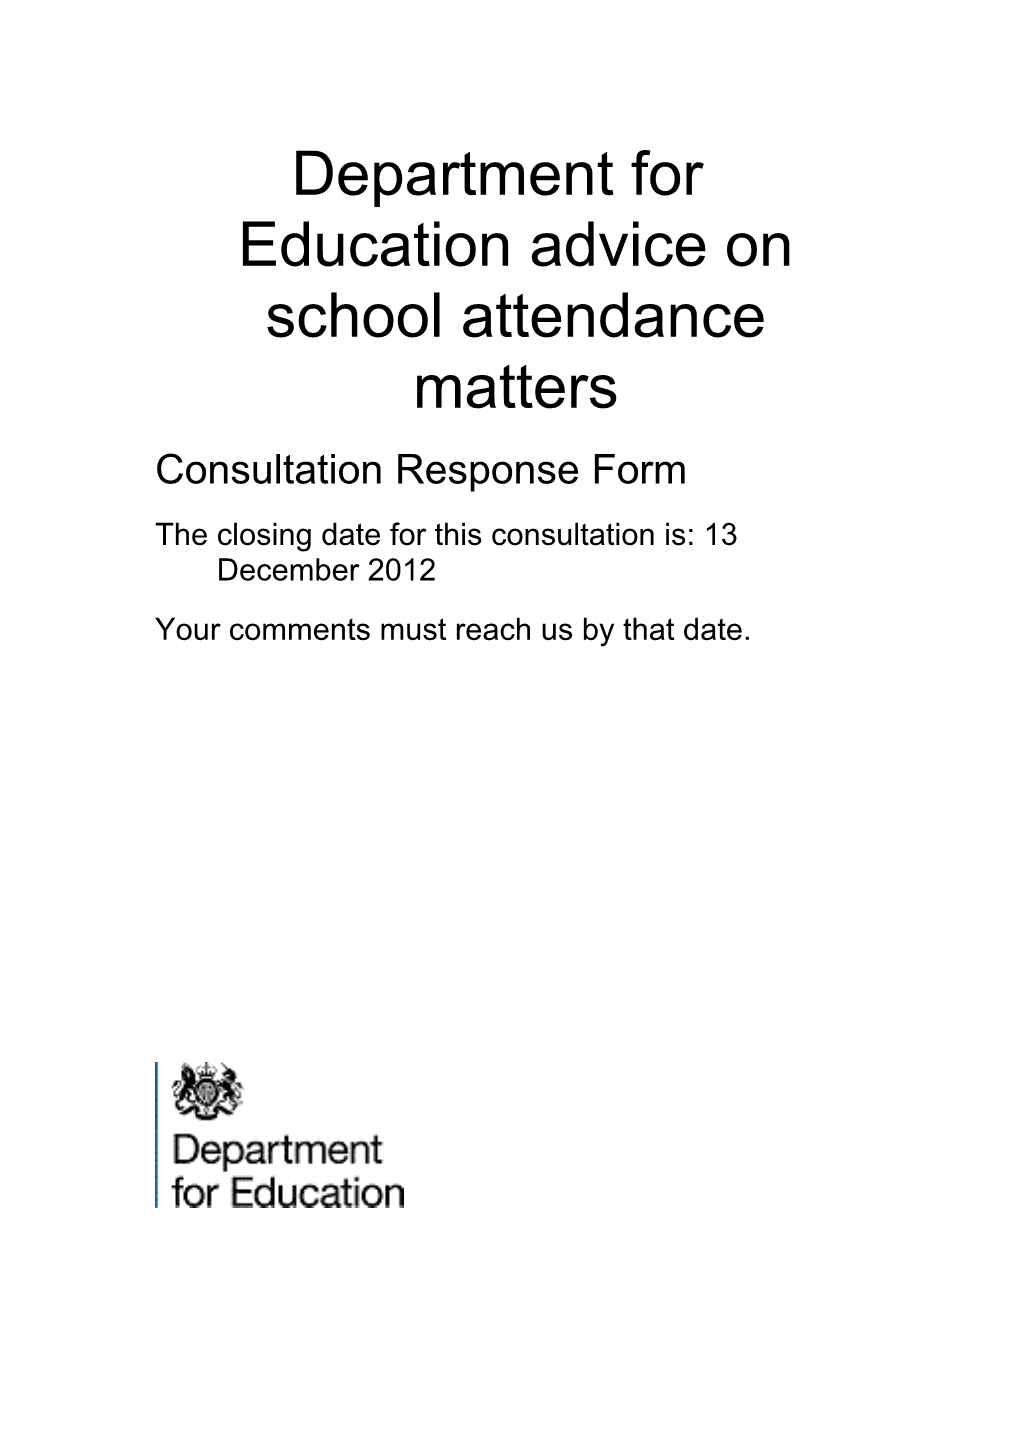 Department for Education Advice on School Attendance Matters